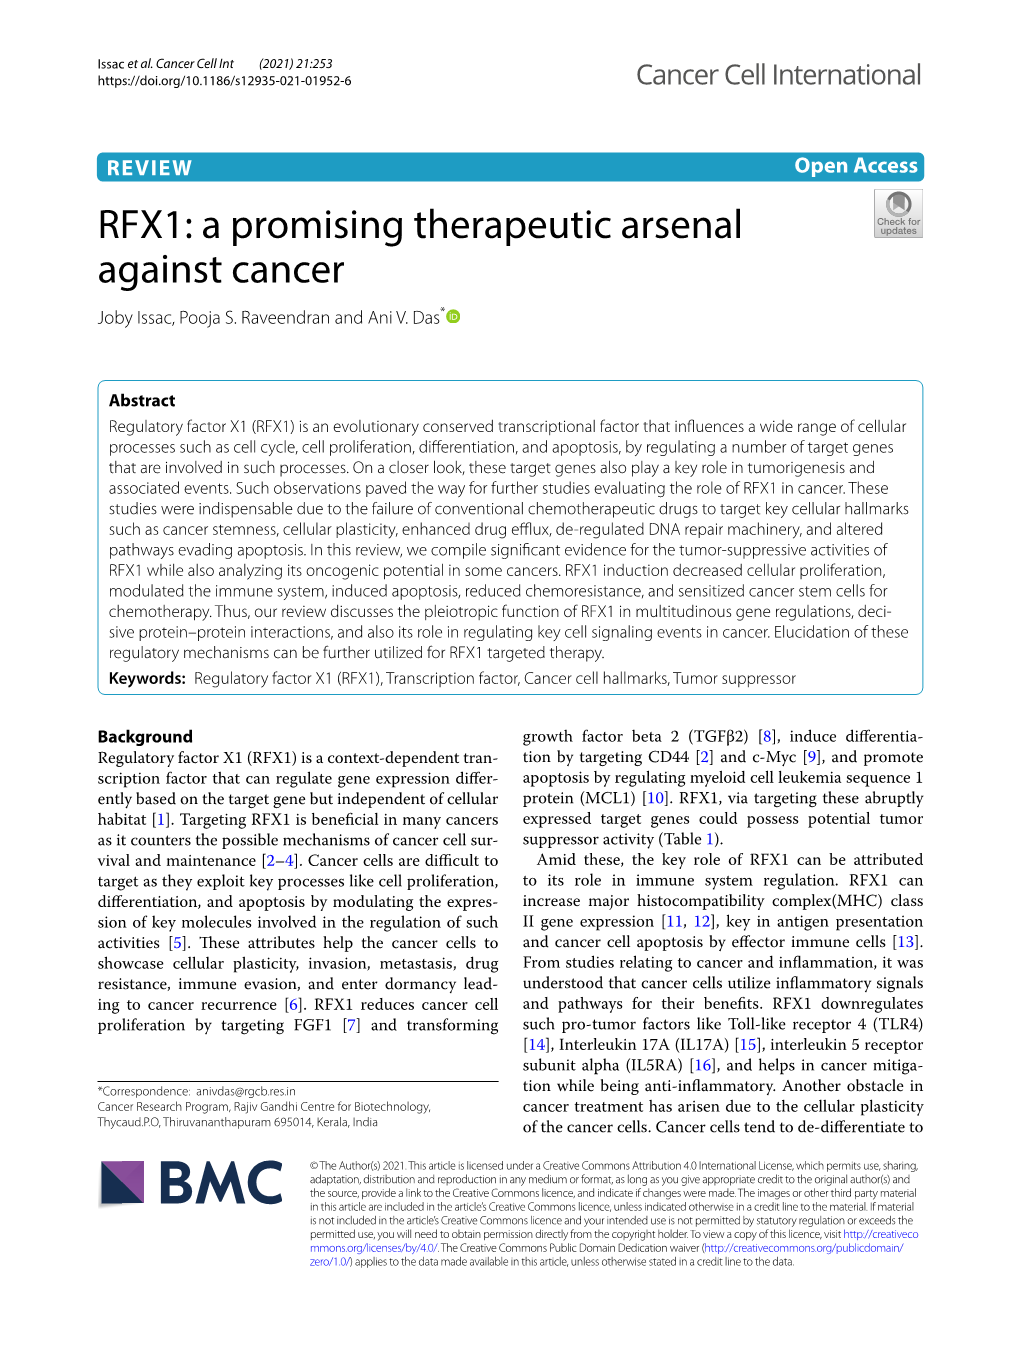 RFX1: a Promising Therapeutic Arsenal Against Cancer Joby Issac, Pooja S